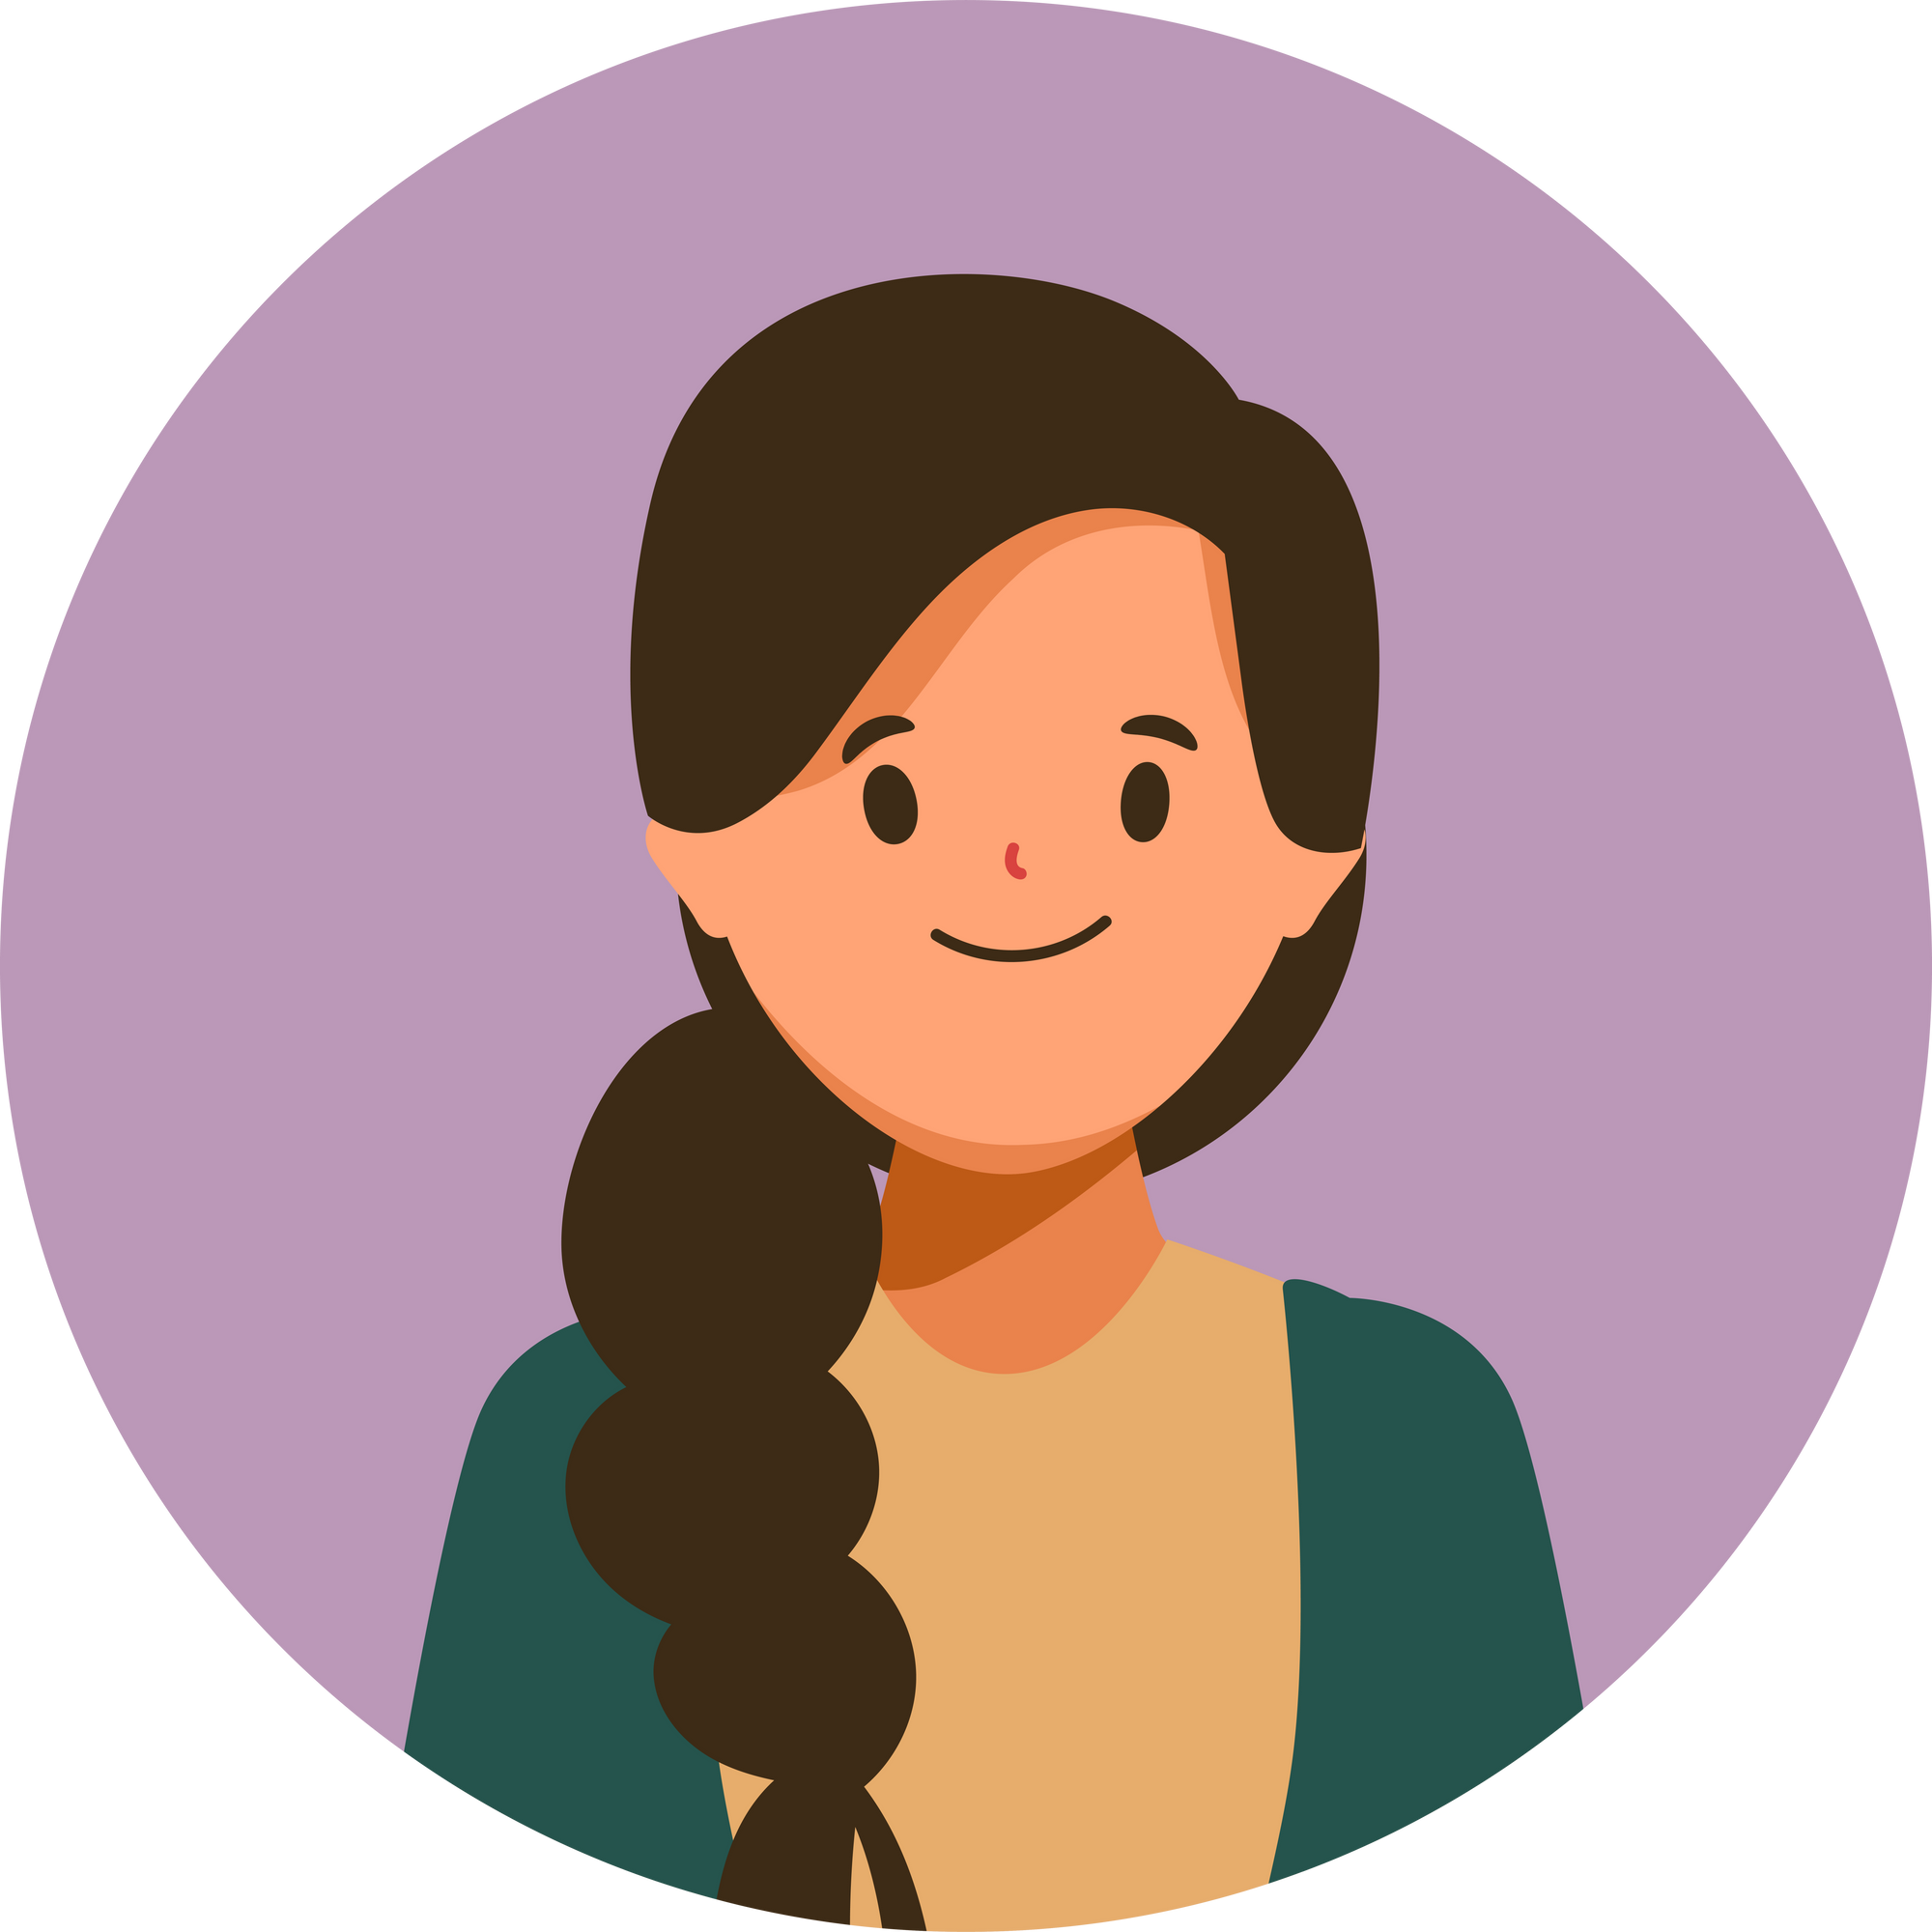 Woman profile picture in circle clipart element character.